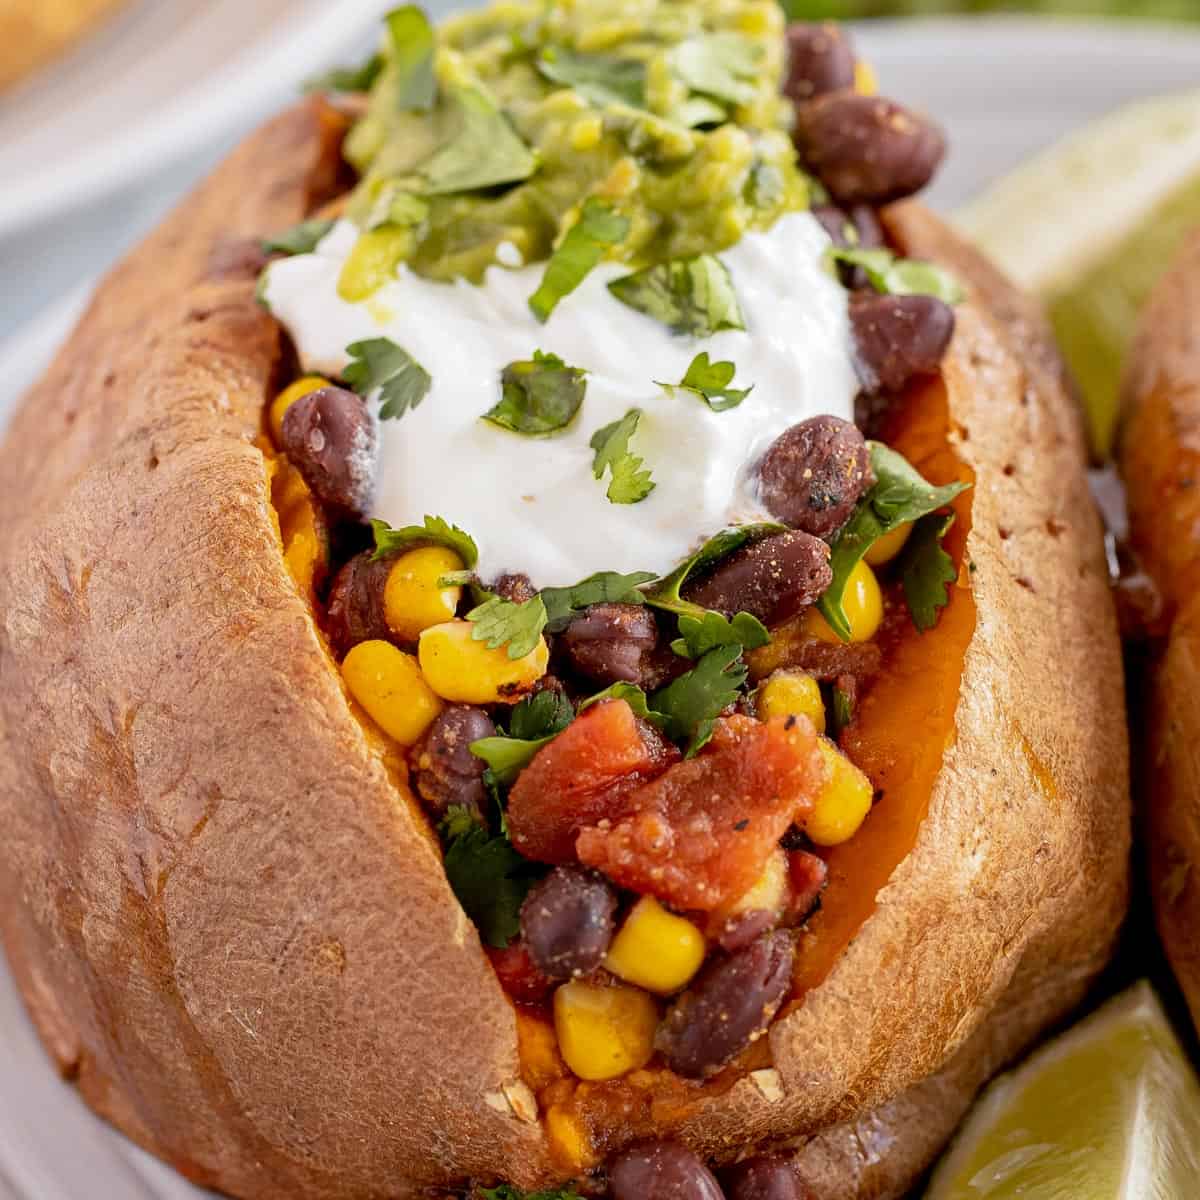 baked sweet potato with black bean salad on a plate.